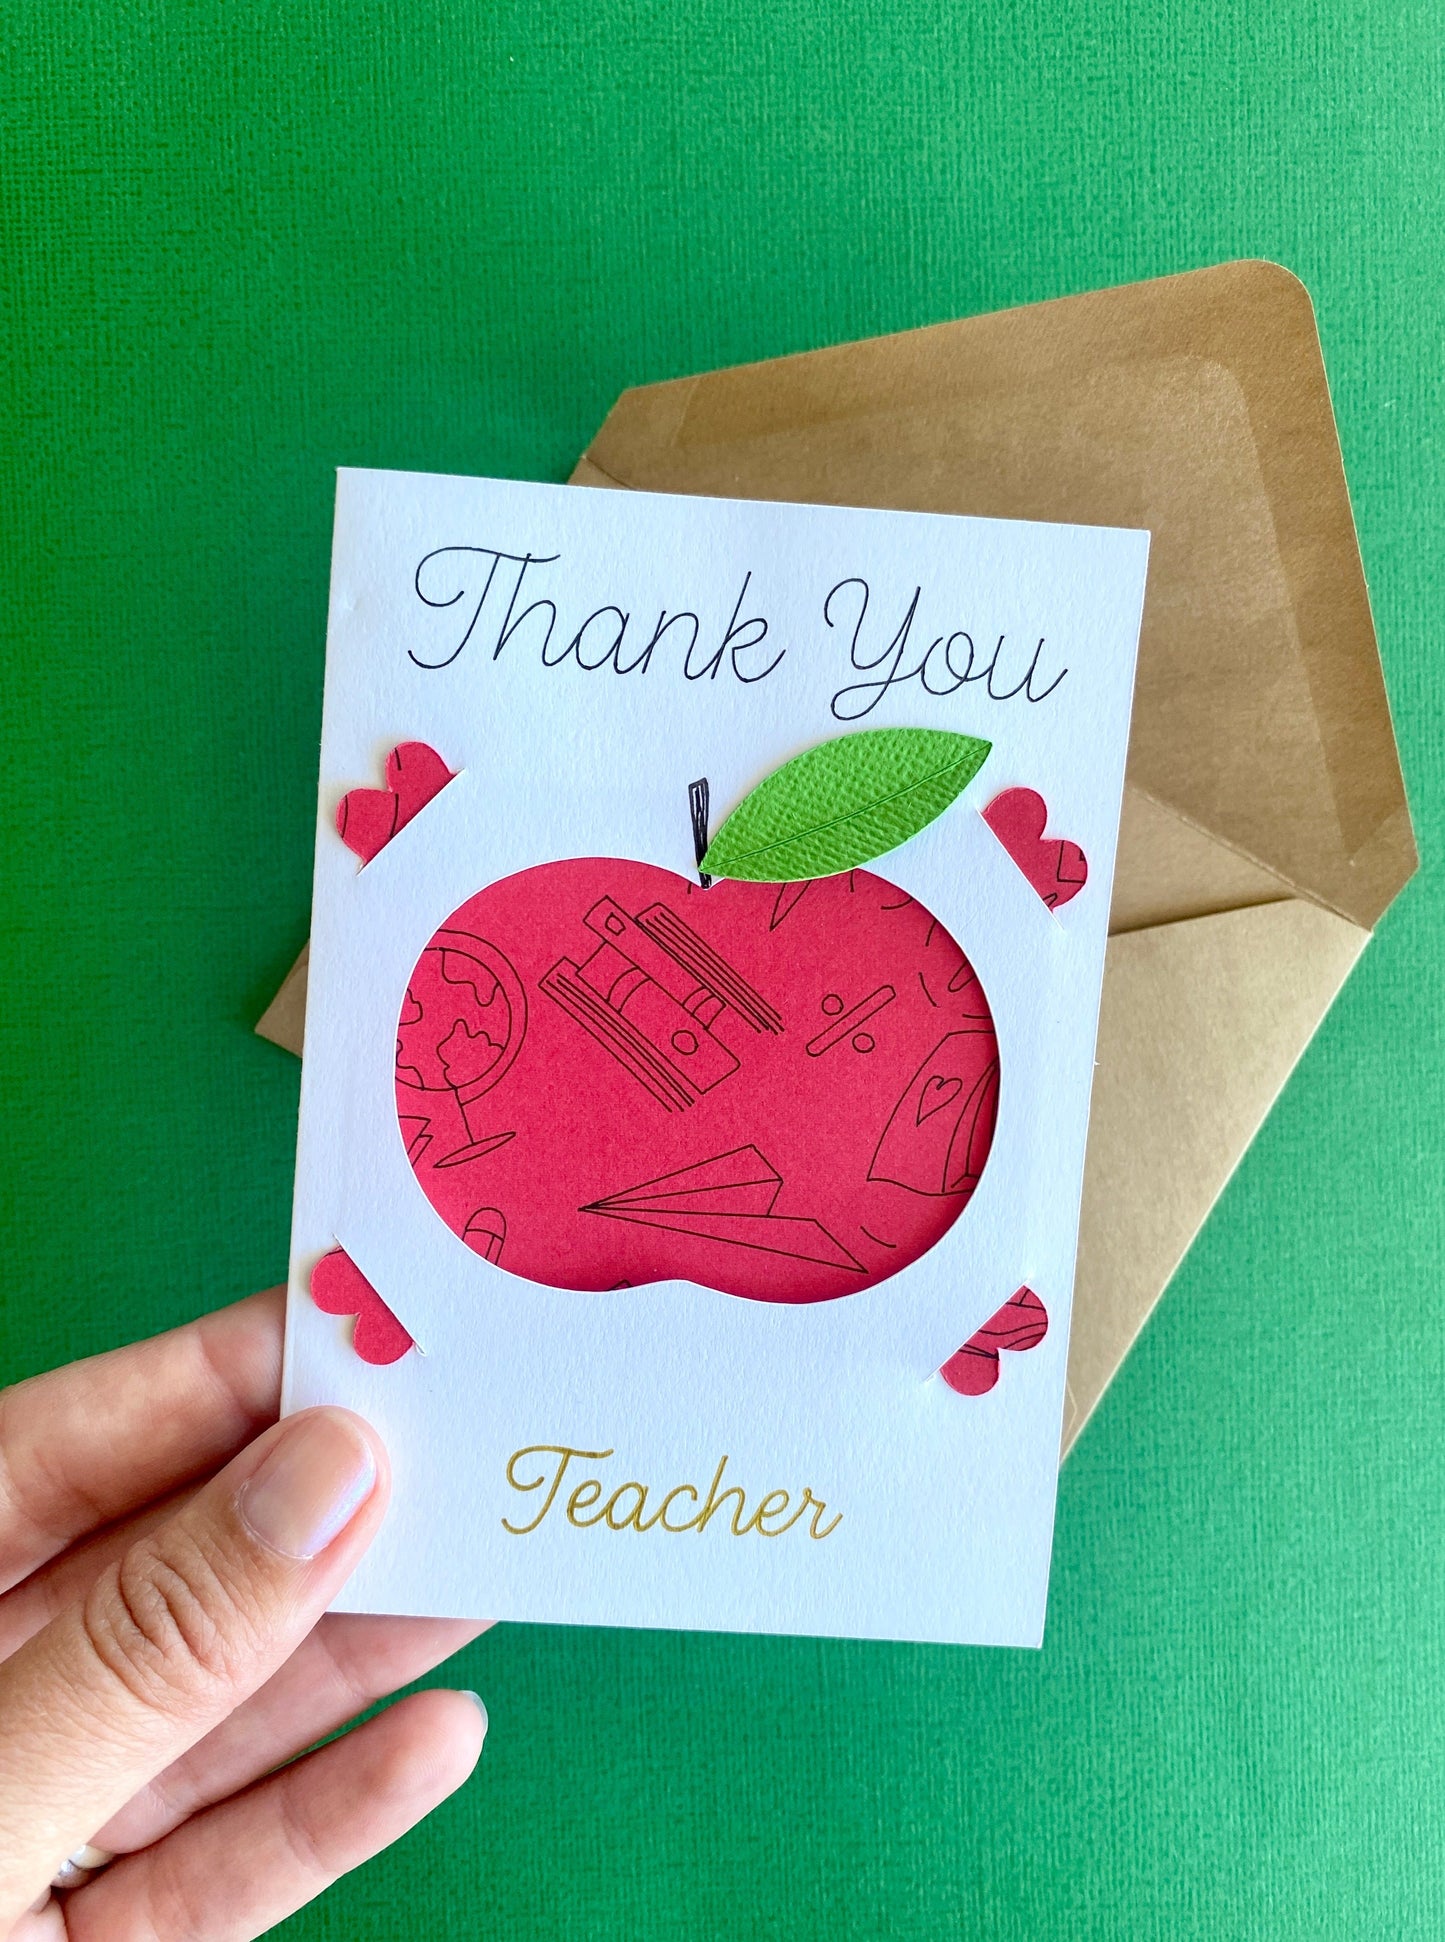 Thank you cards for teachers